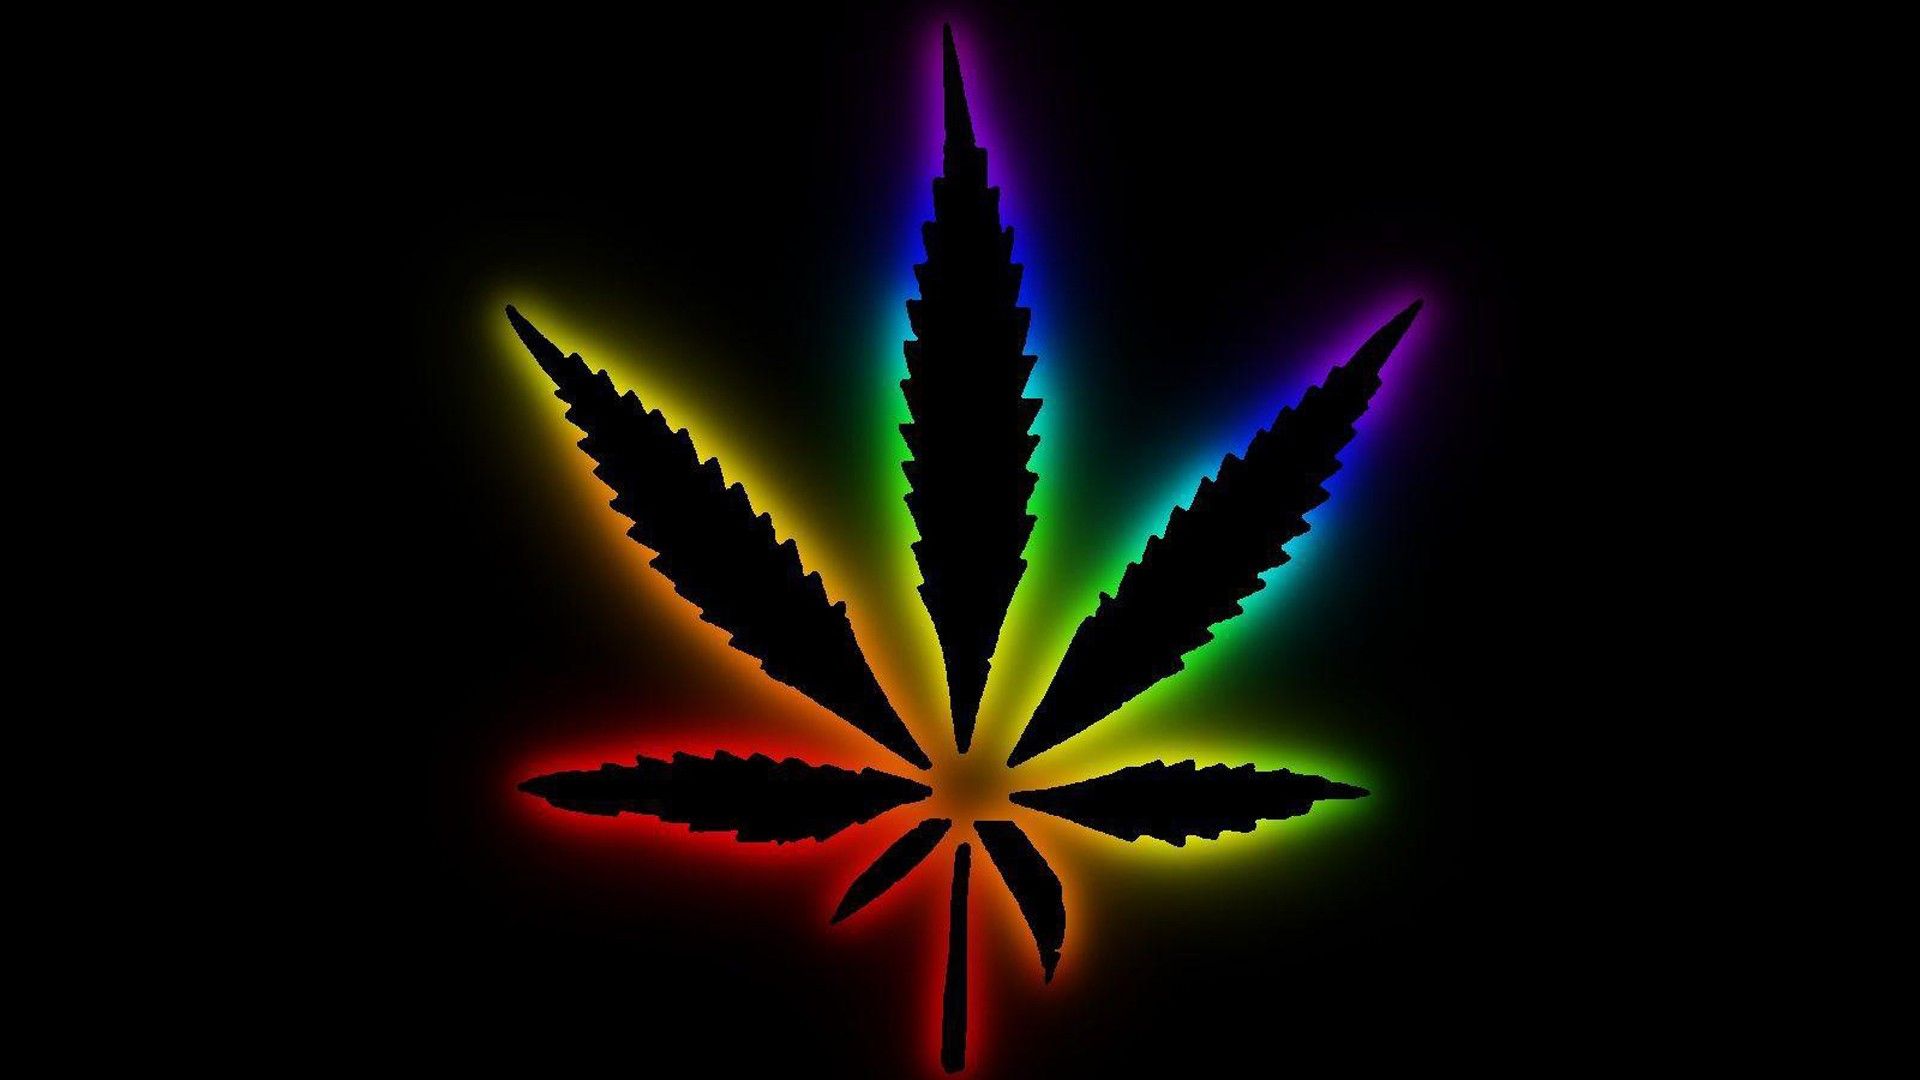 Colorful Weed Leaf In Black Backgrounds HD Weed Wallpapers.